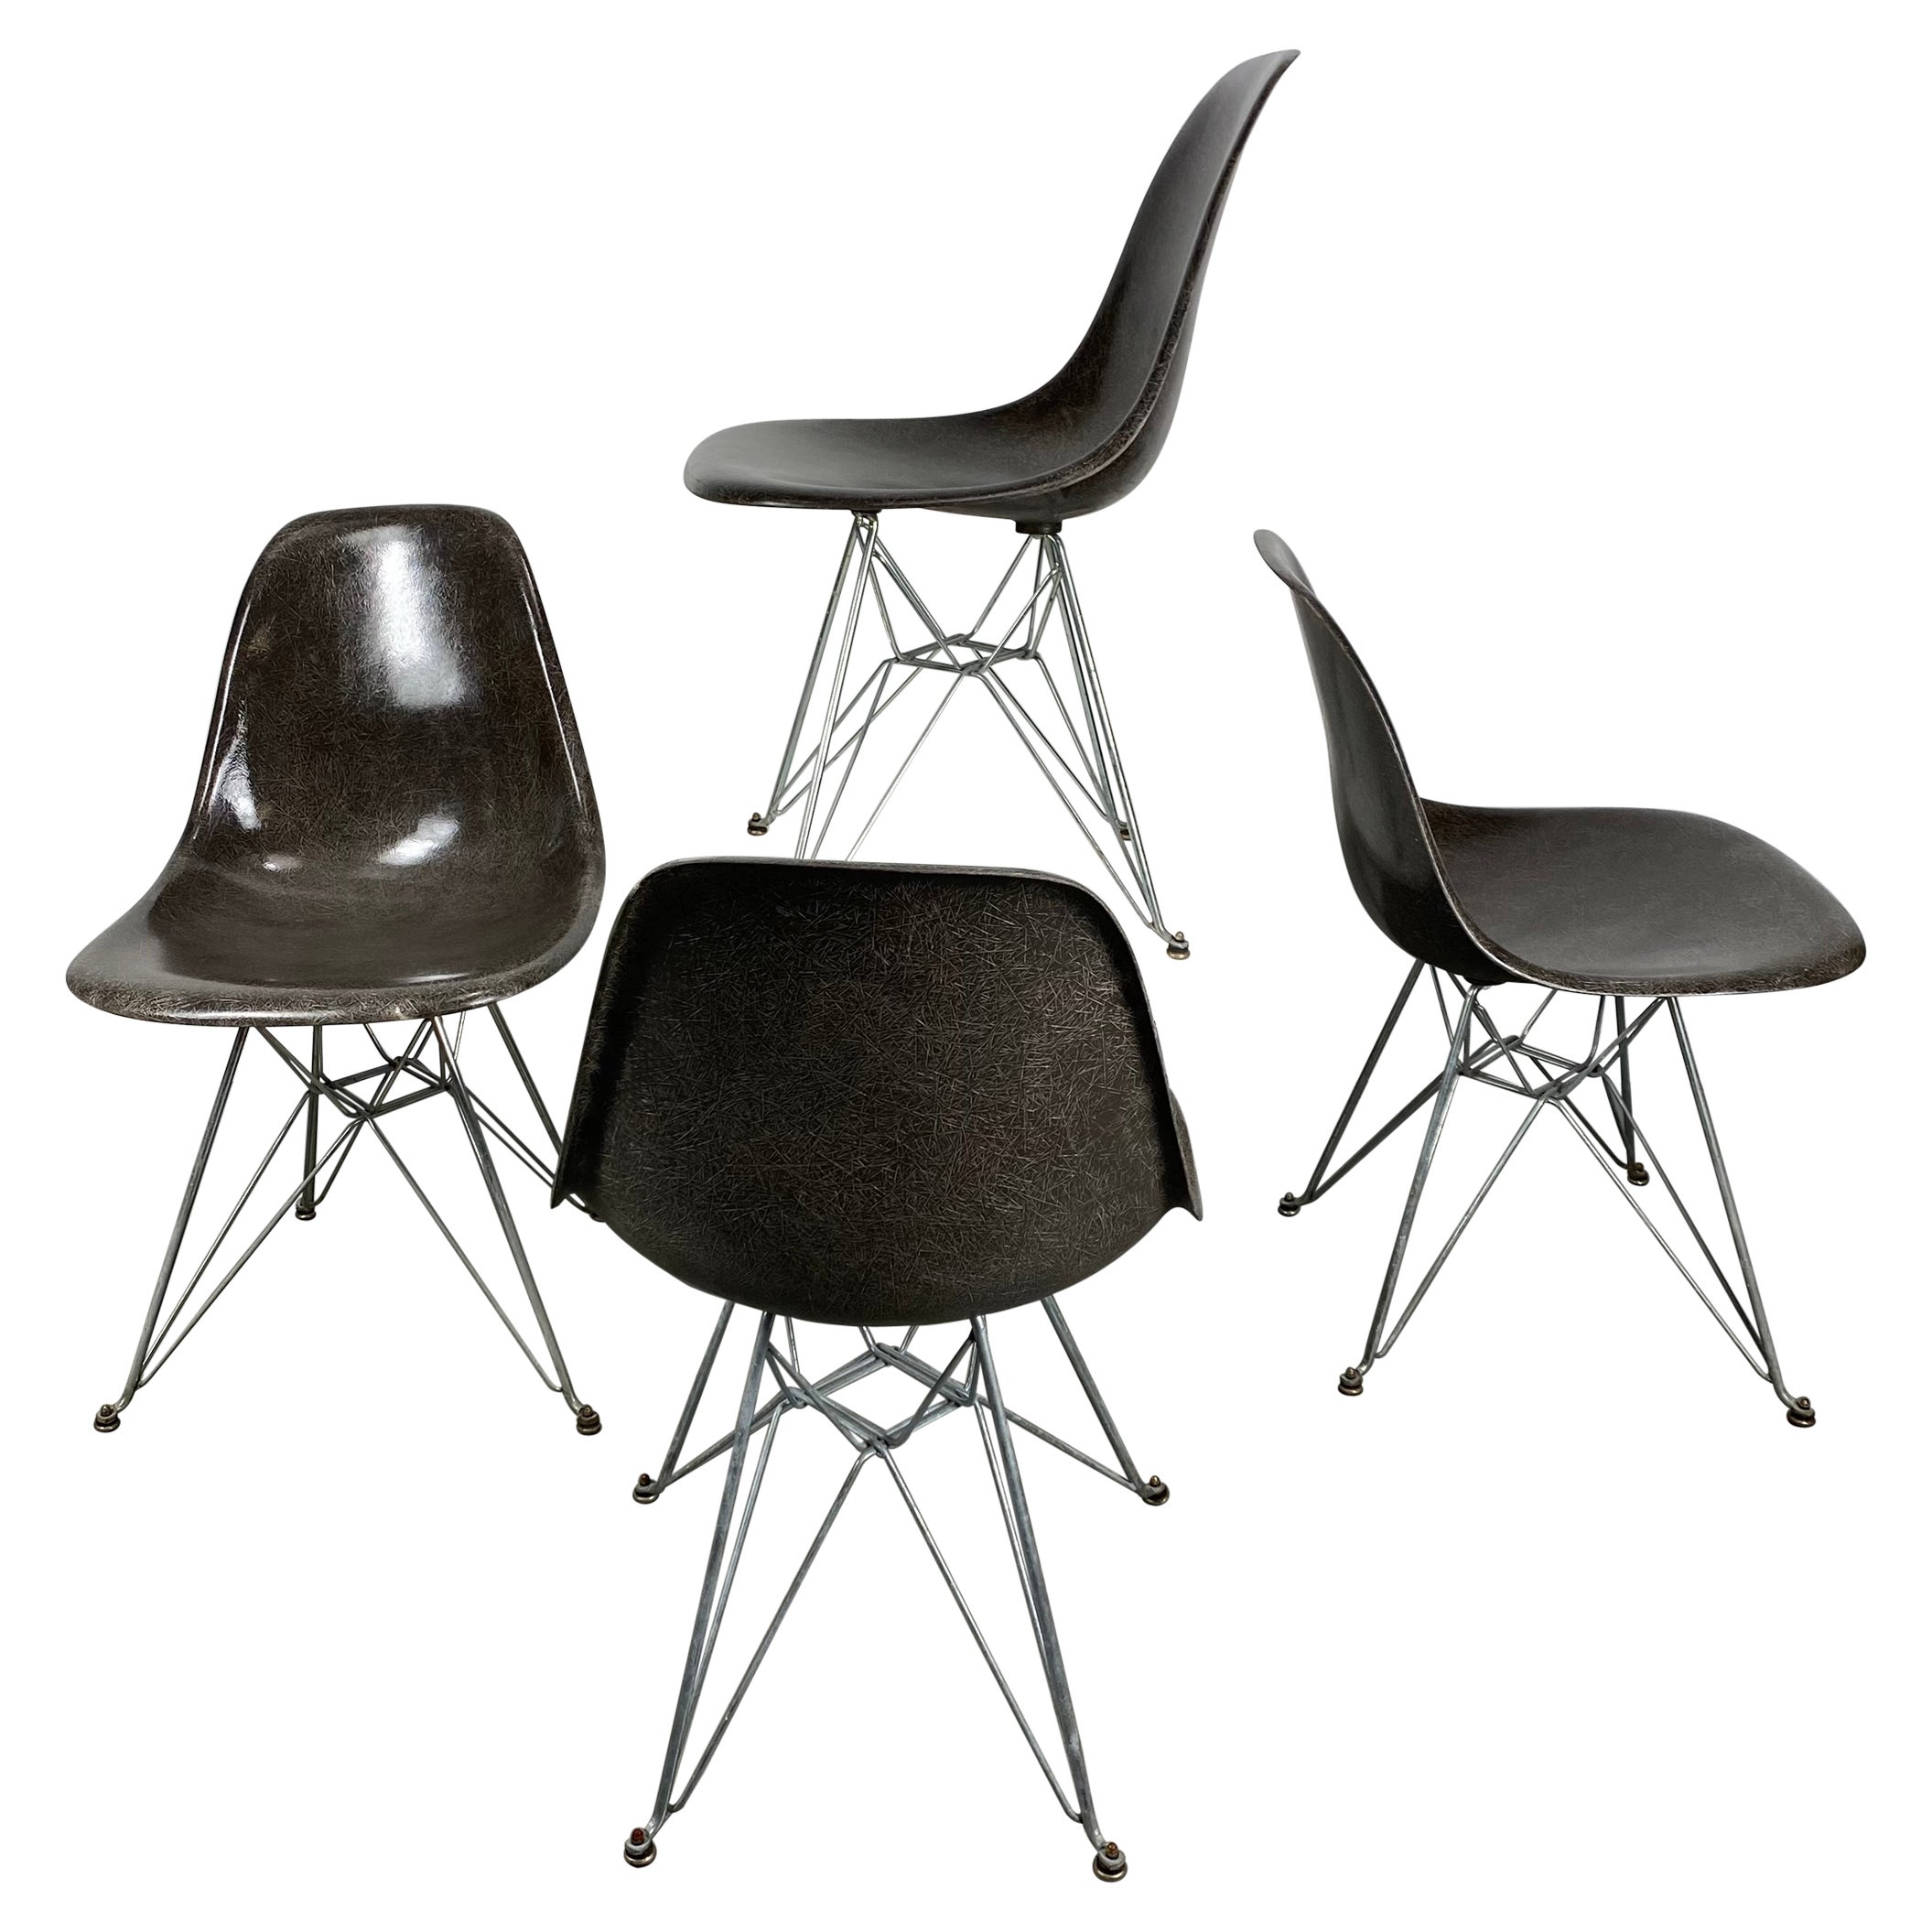 Set 4 Early Eames Fiberglass DSR Chairs on Eiffel Tower Bases